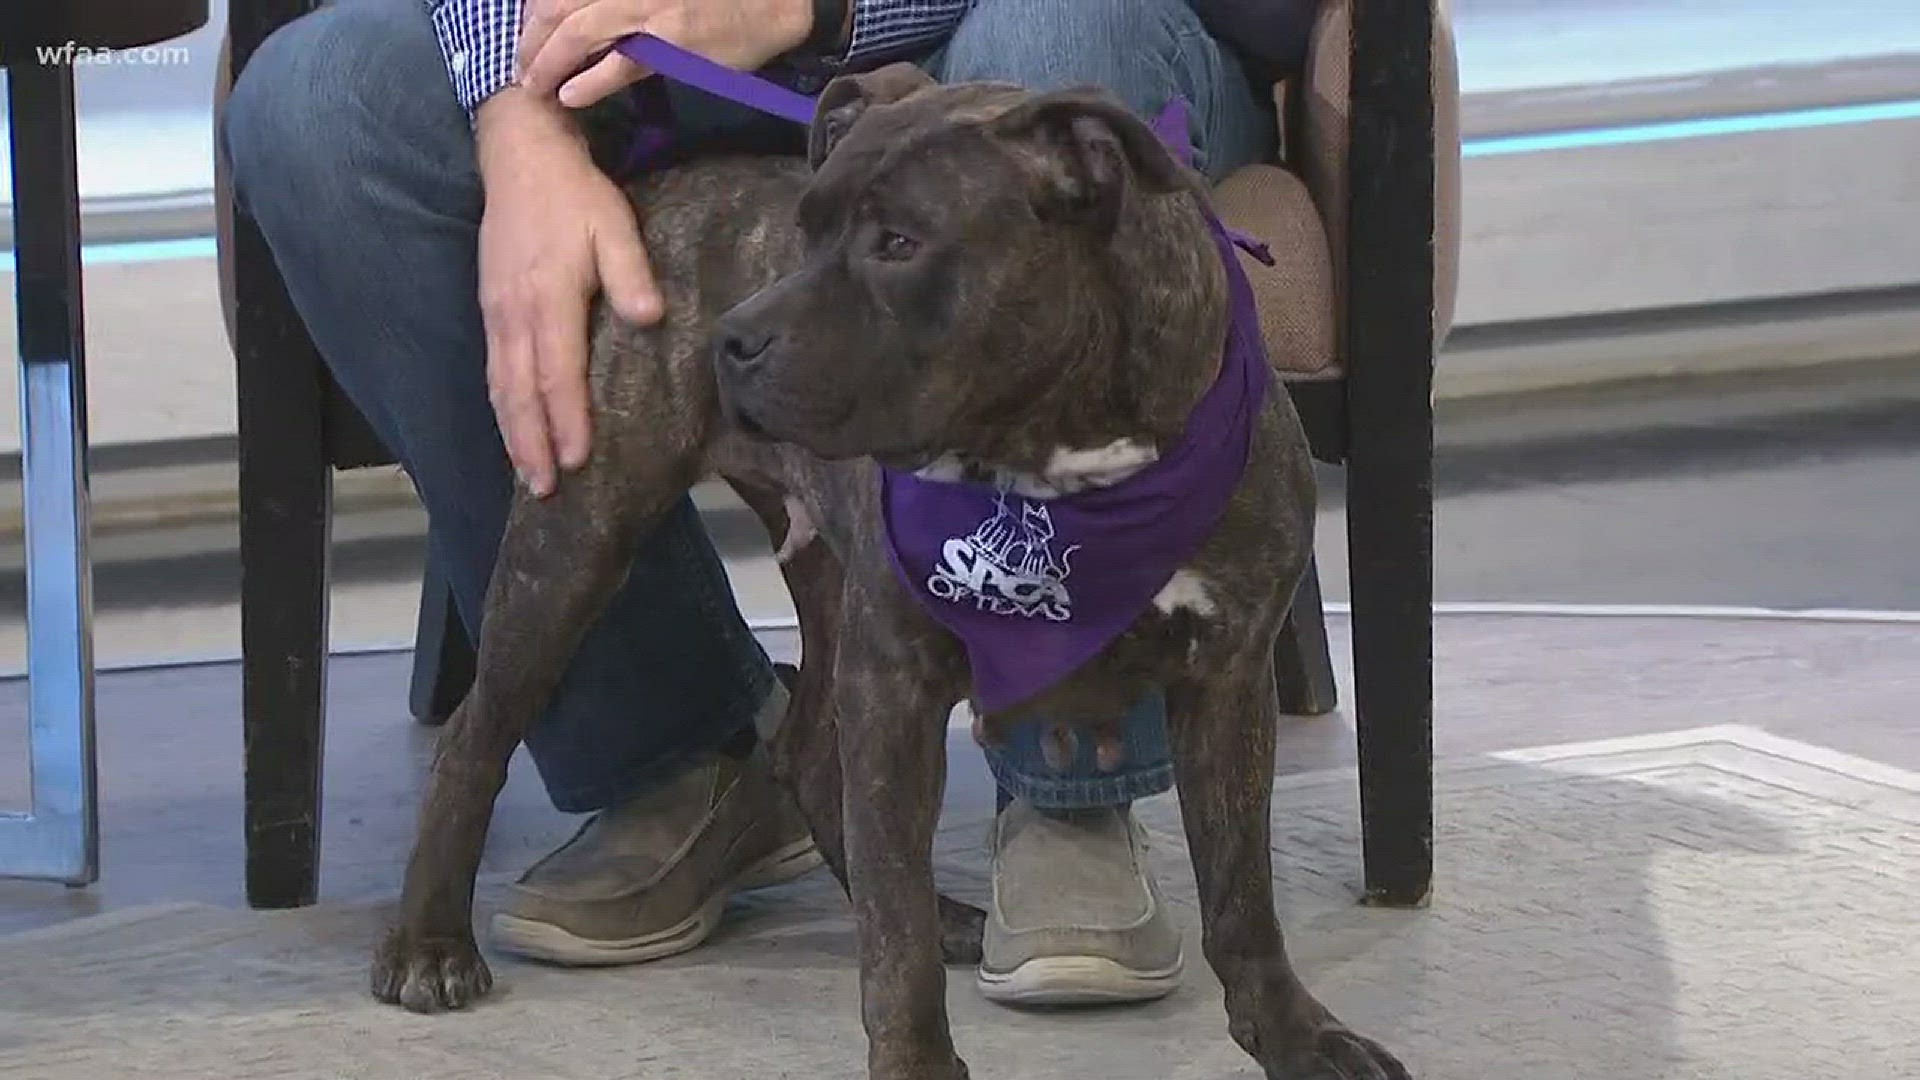 Tailwagger 'Little Mama' is up for adoption through the SPCA.